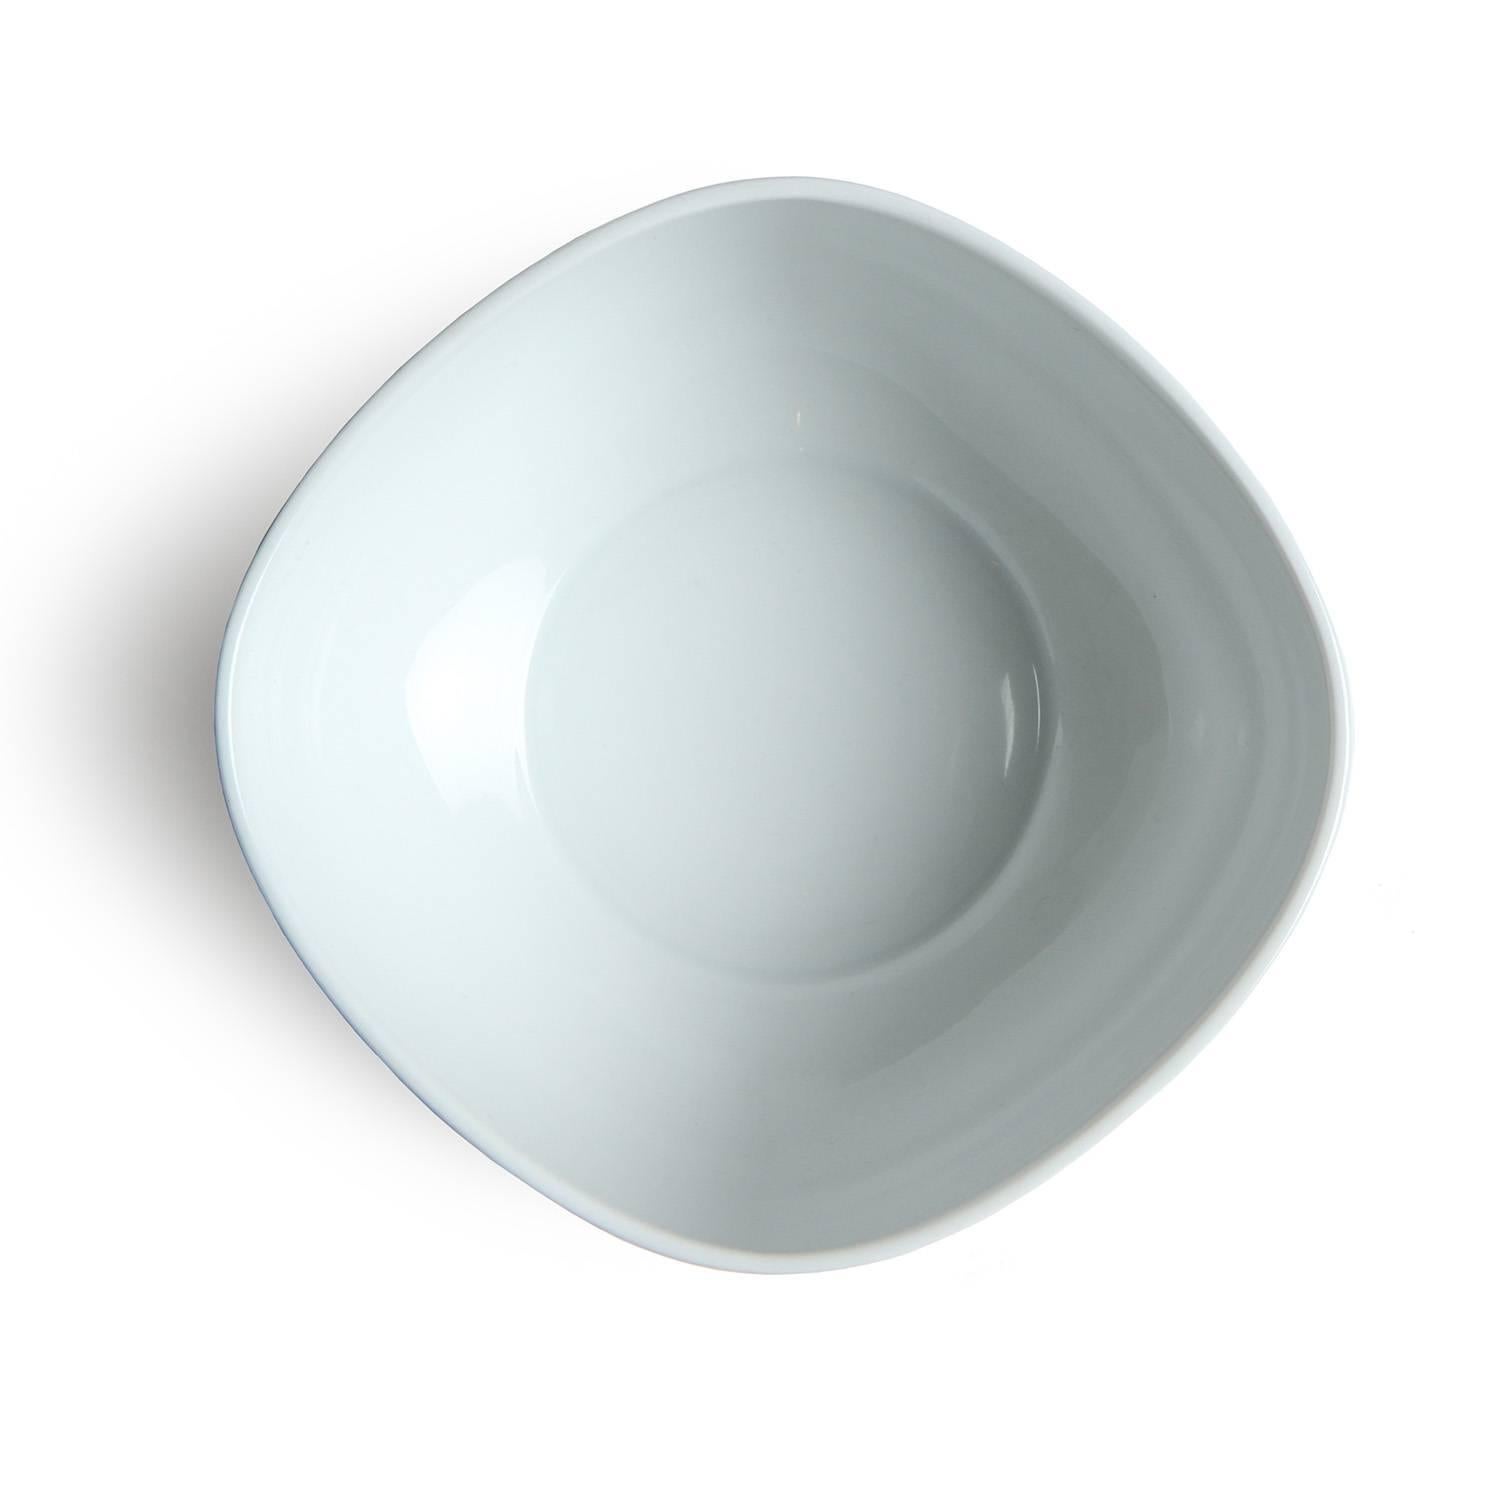 A beautiful and simple tall walled bowl made of pure white porcelain.